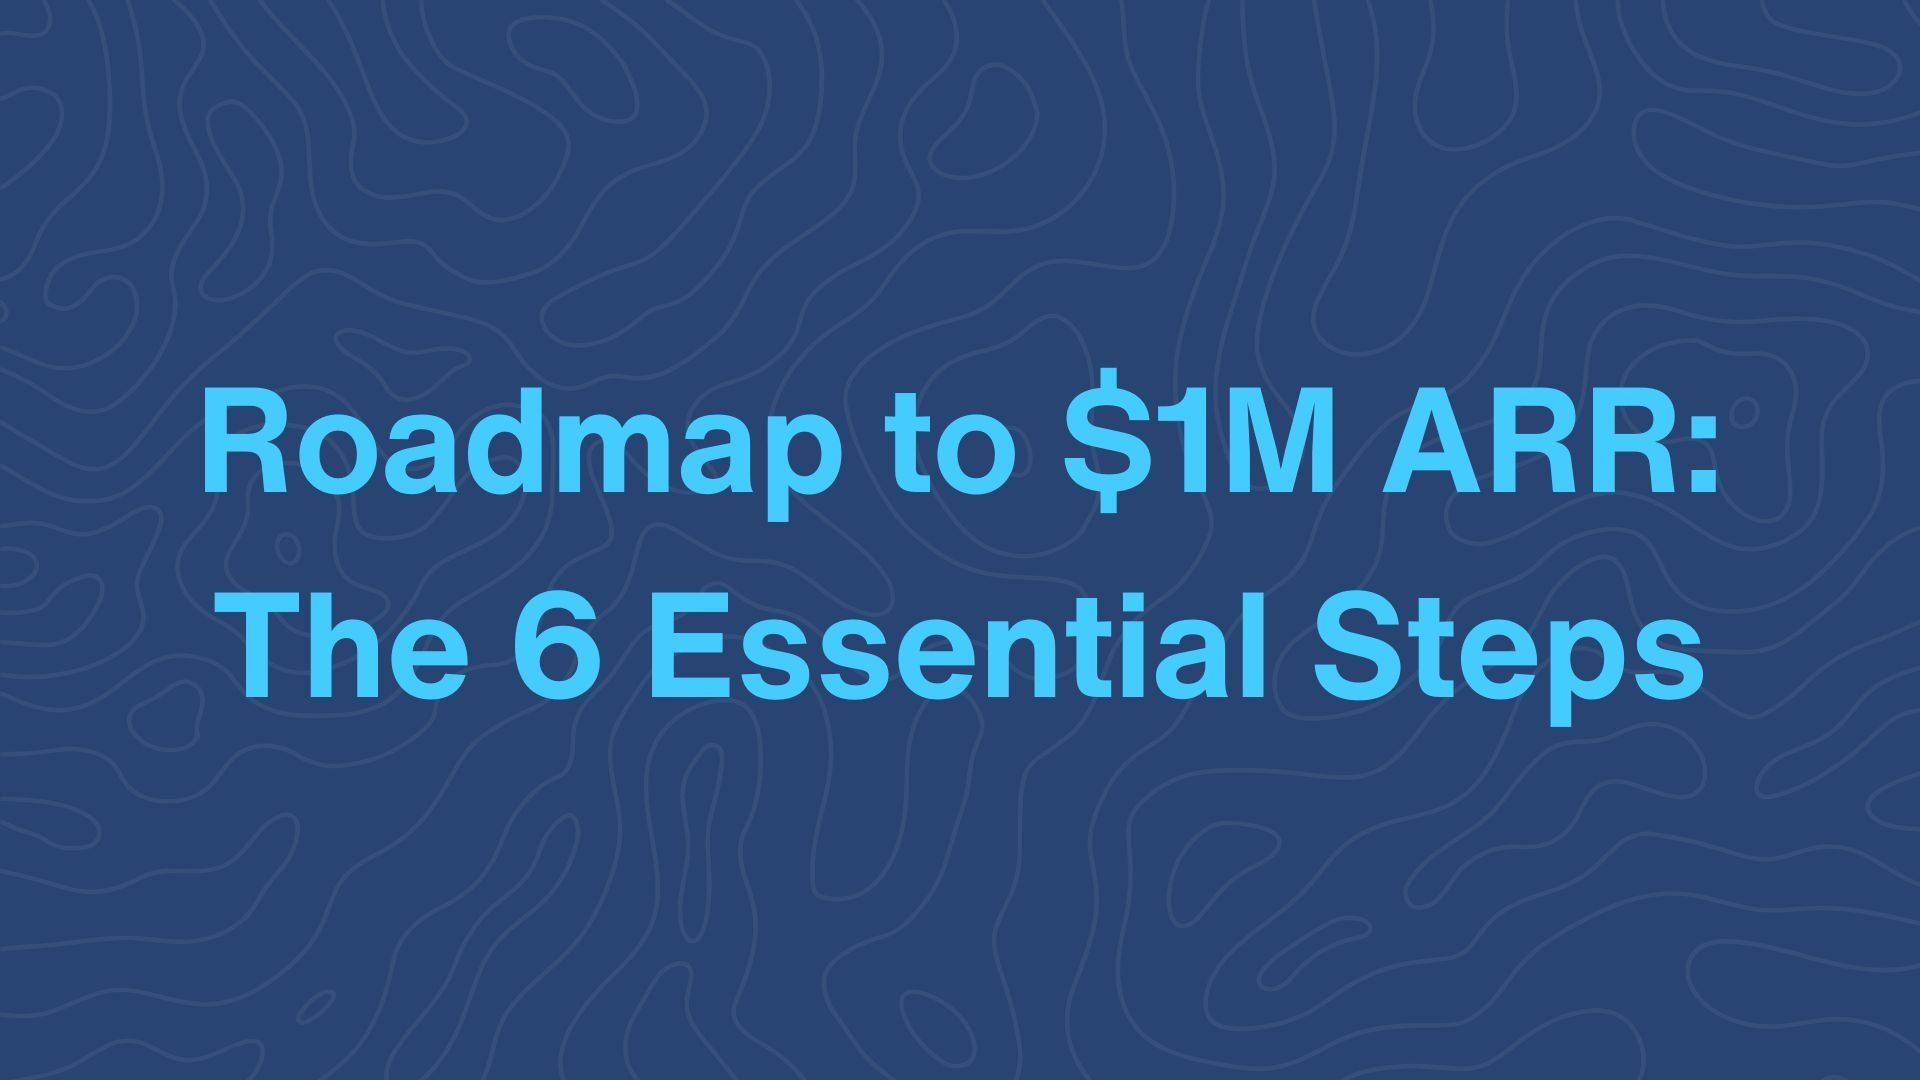 Roadmap to $1M ARR: The 6 Essential Steps